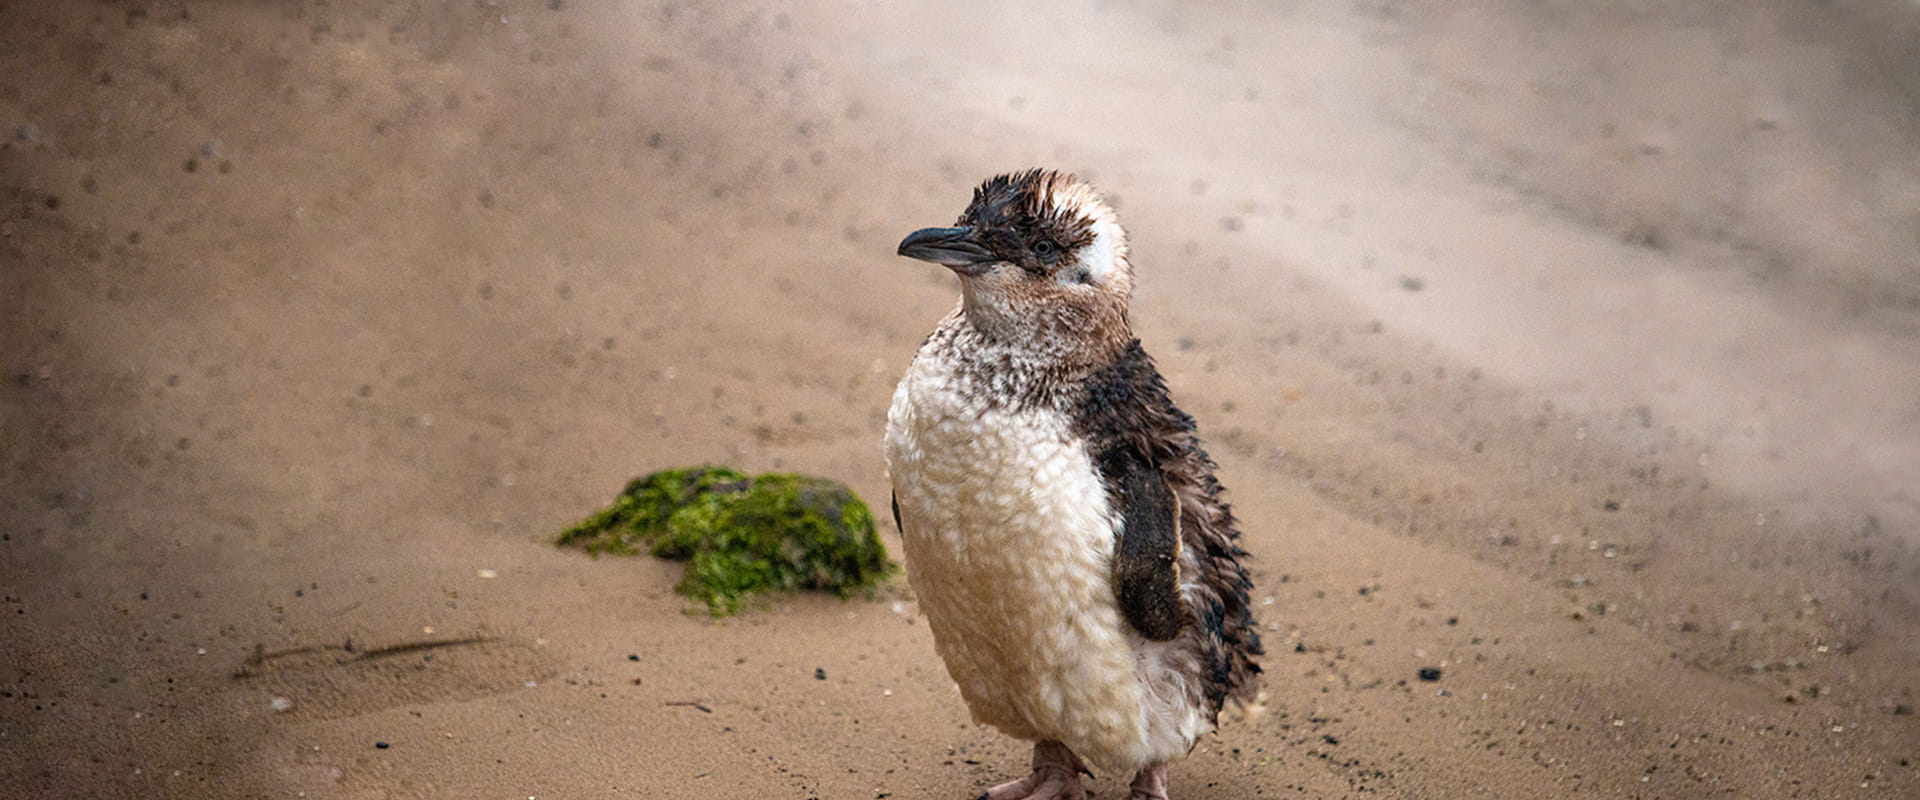 A small penguin stands on a sandy beach